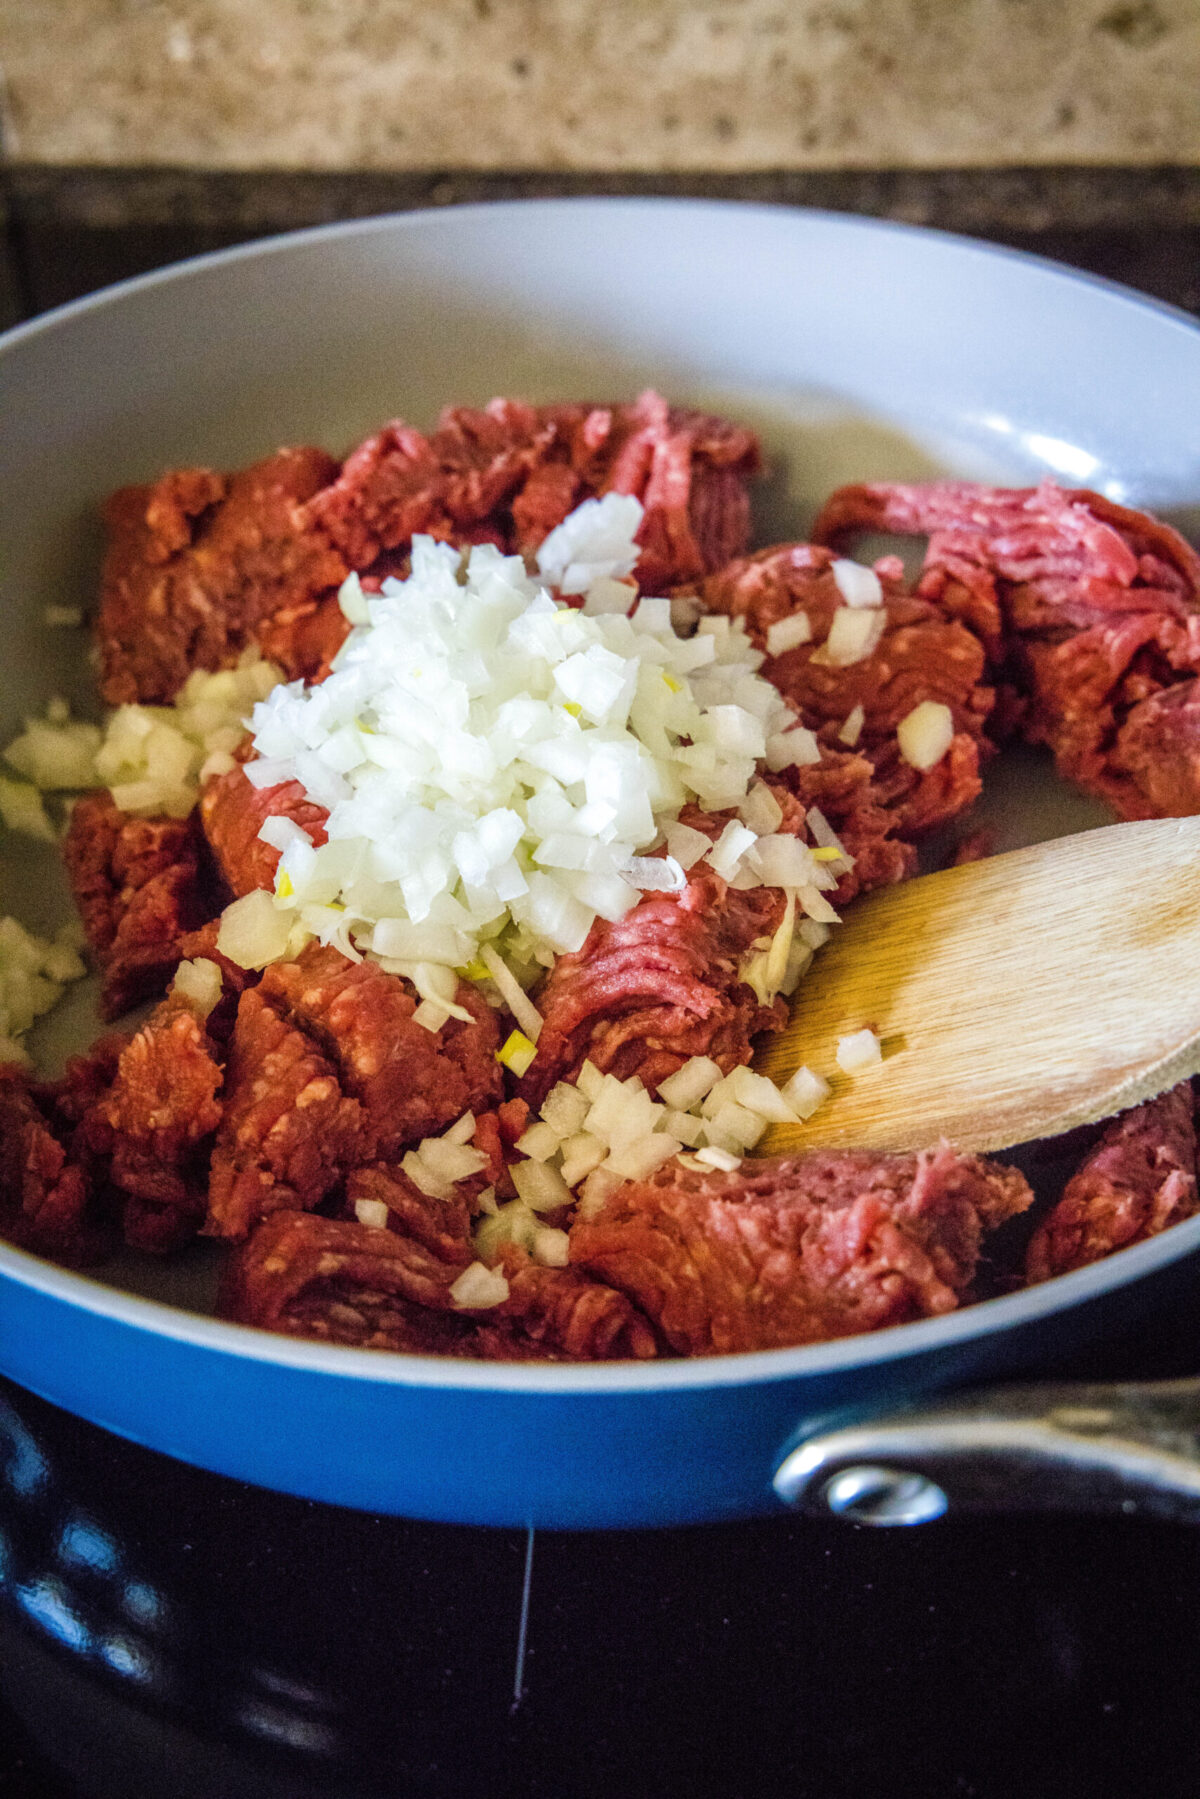 Raw beef and onions being mixed together in a skillet